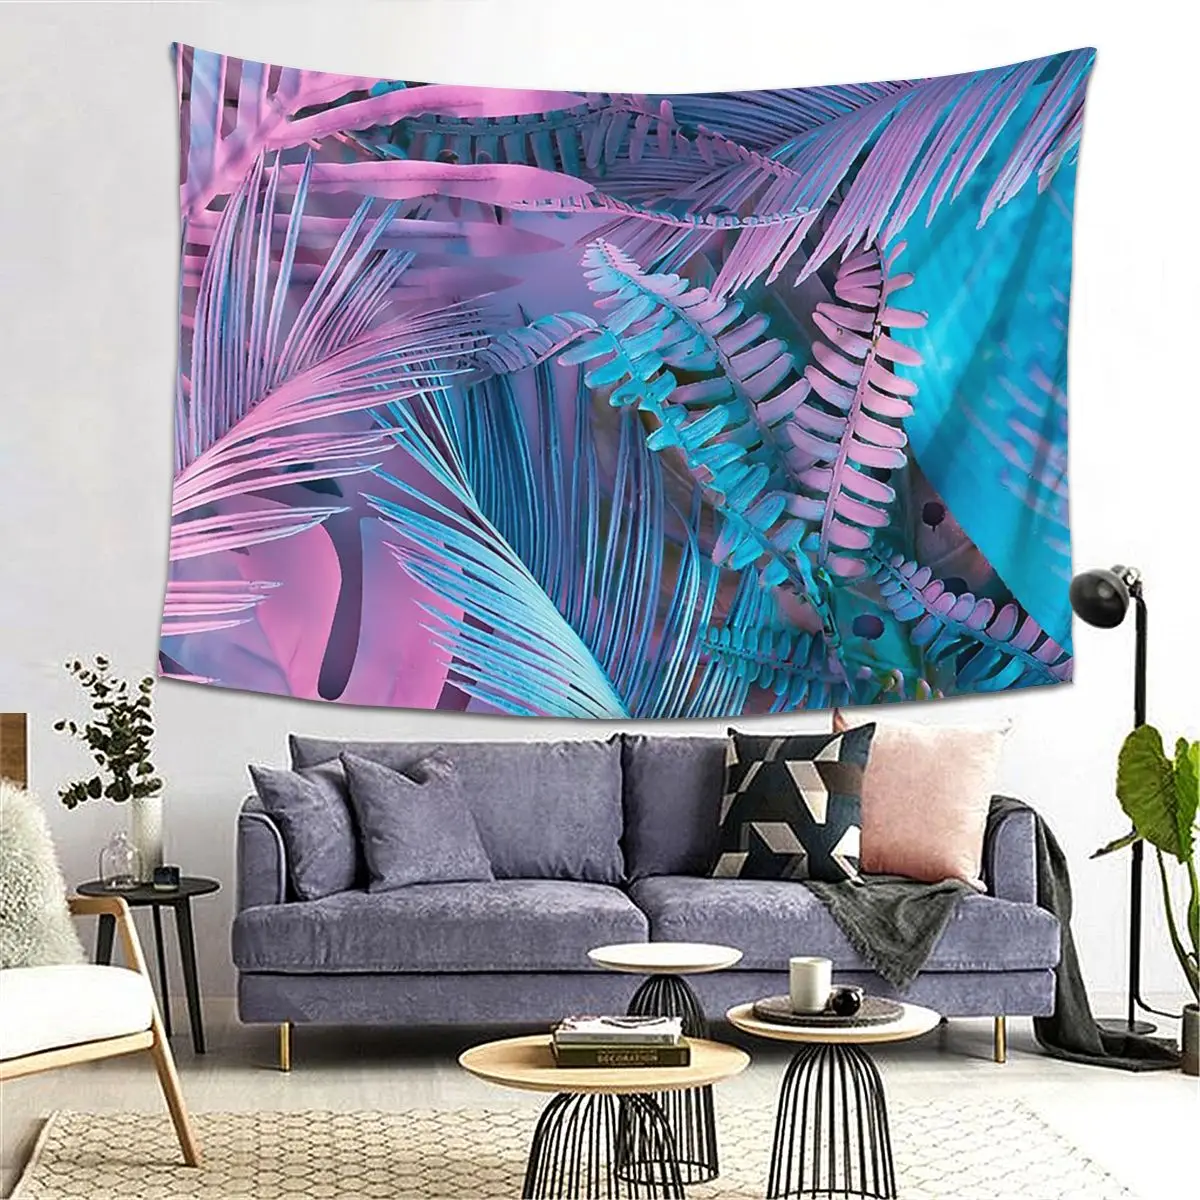 

Neon Pink And Blue Exotic Palm Leaves Tapestry Art Aesthetic Tapestries for Living Room Bedroom Decor Home Hippie Wall Hanging